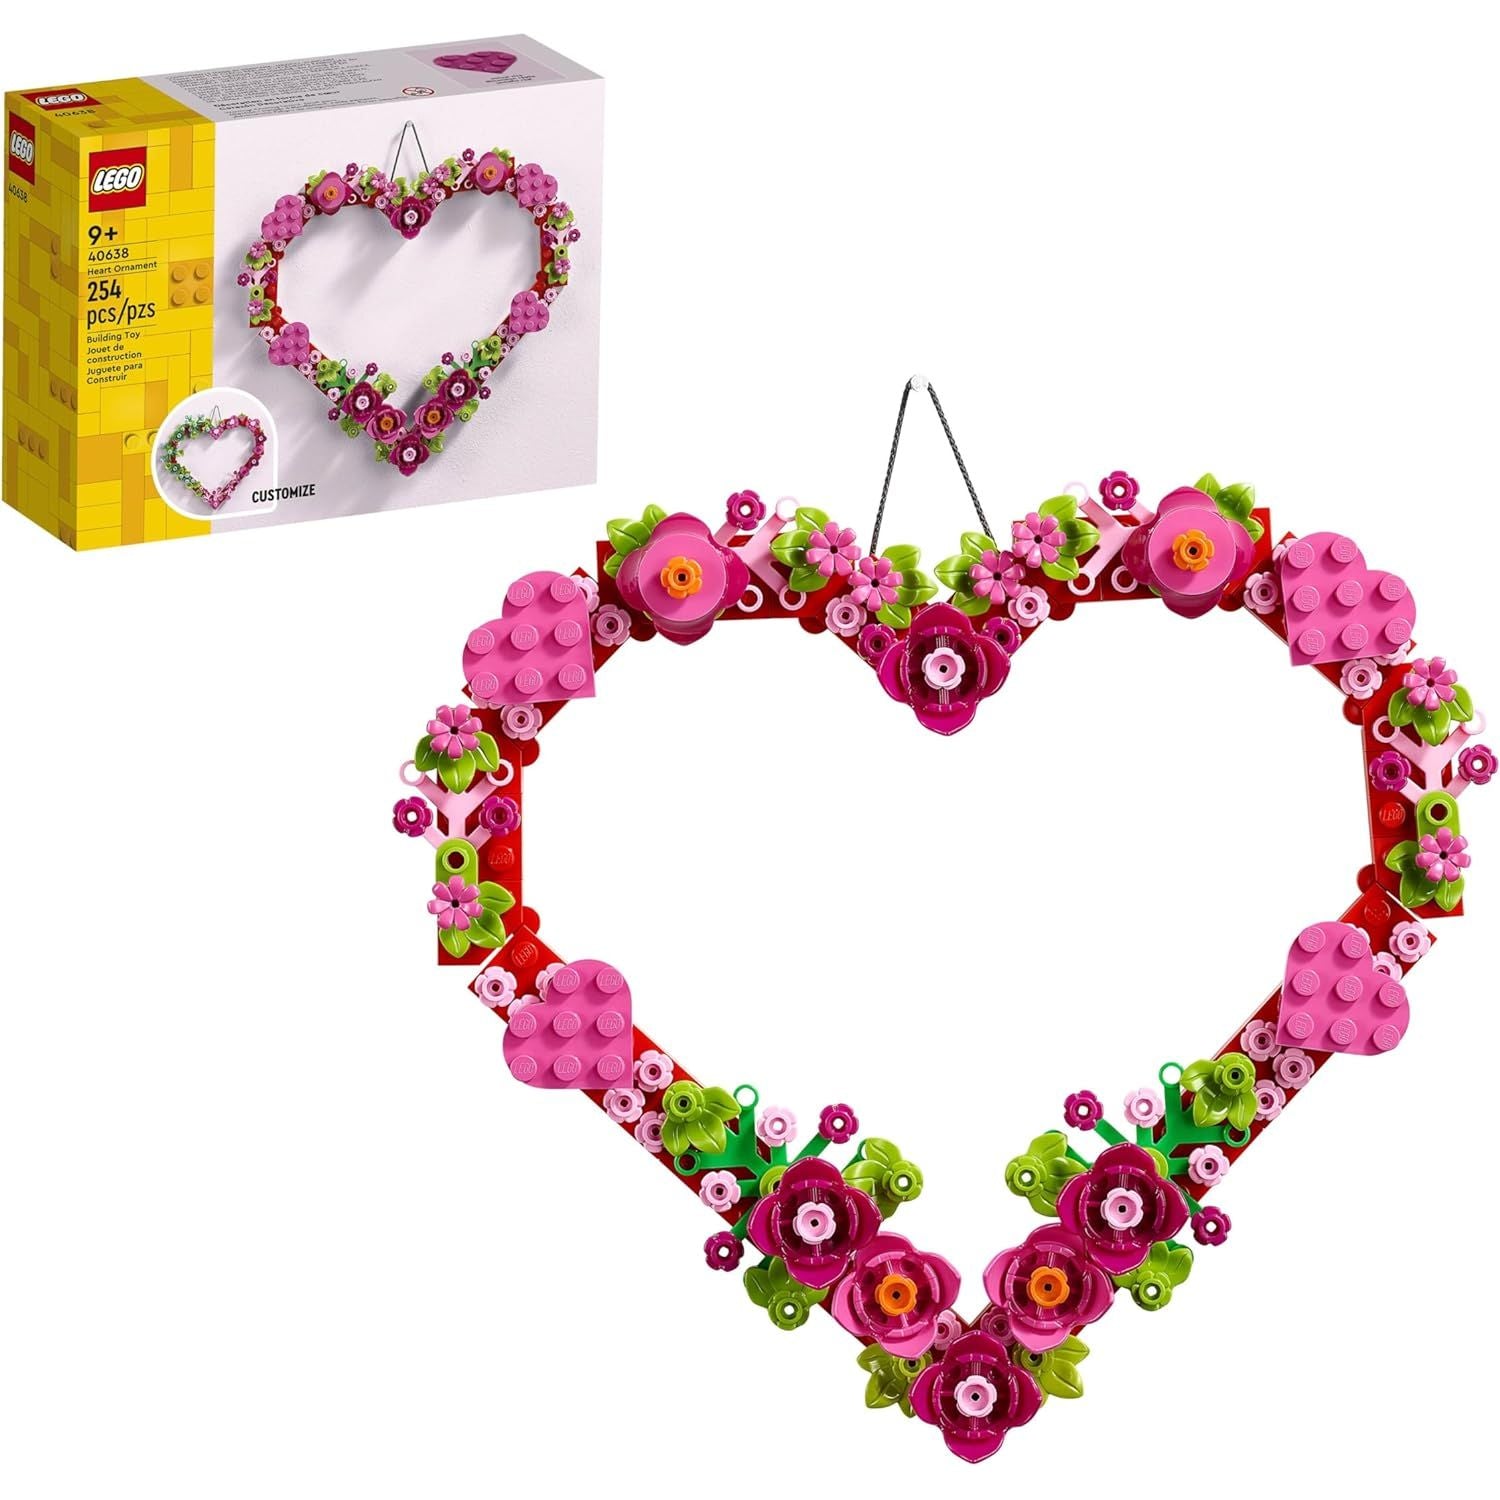 LEGO 40638 Heart Ornament Building Toy Kit, Heart Shaped Arrangement of Artificial Flowers, Great Gift for Loved Ones, Unique Arts & Crafts Activity for Kids.